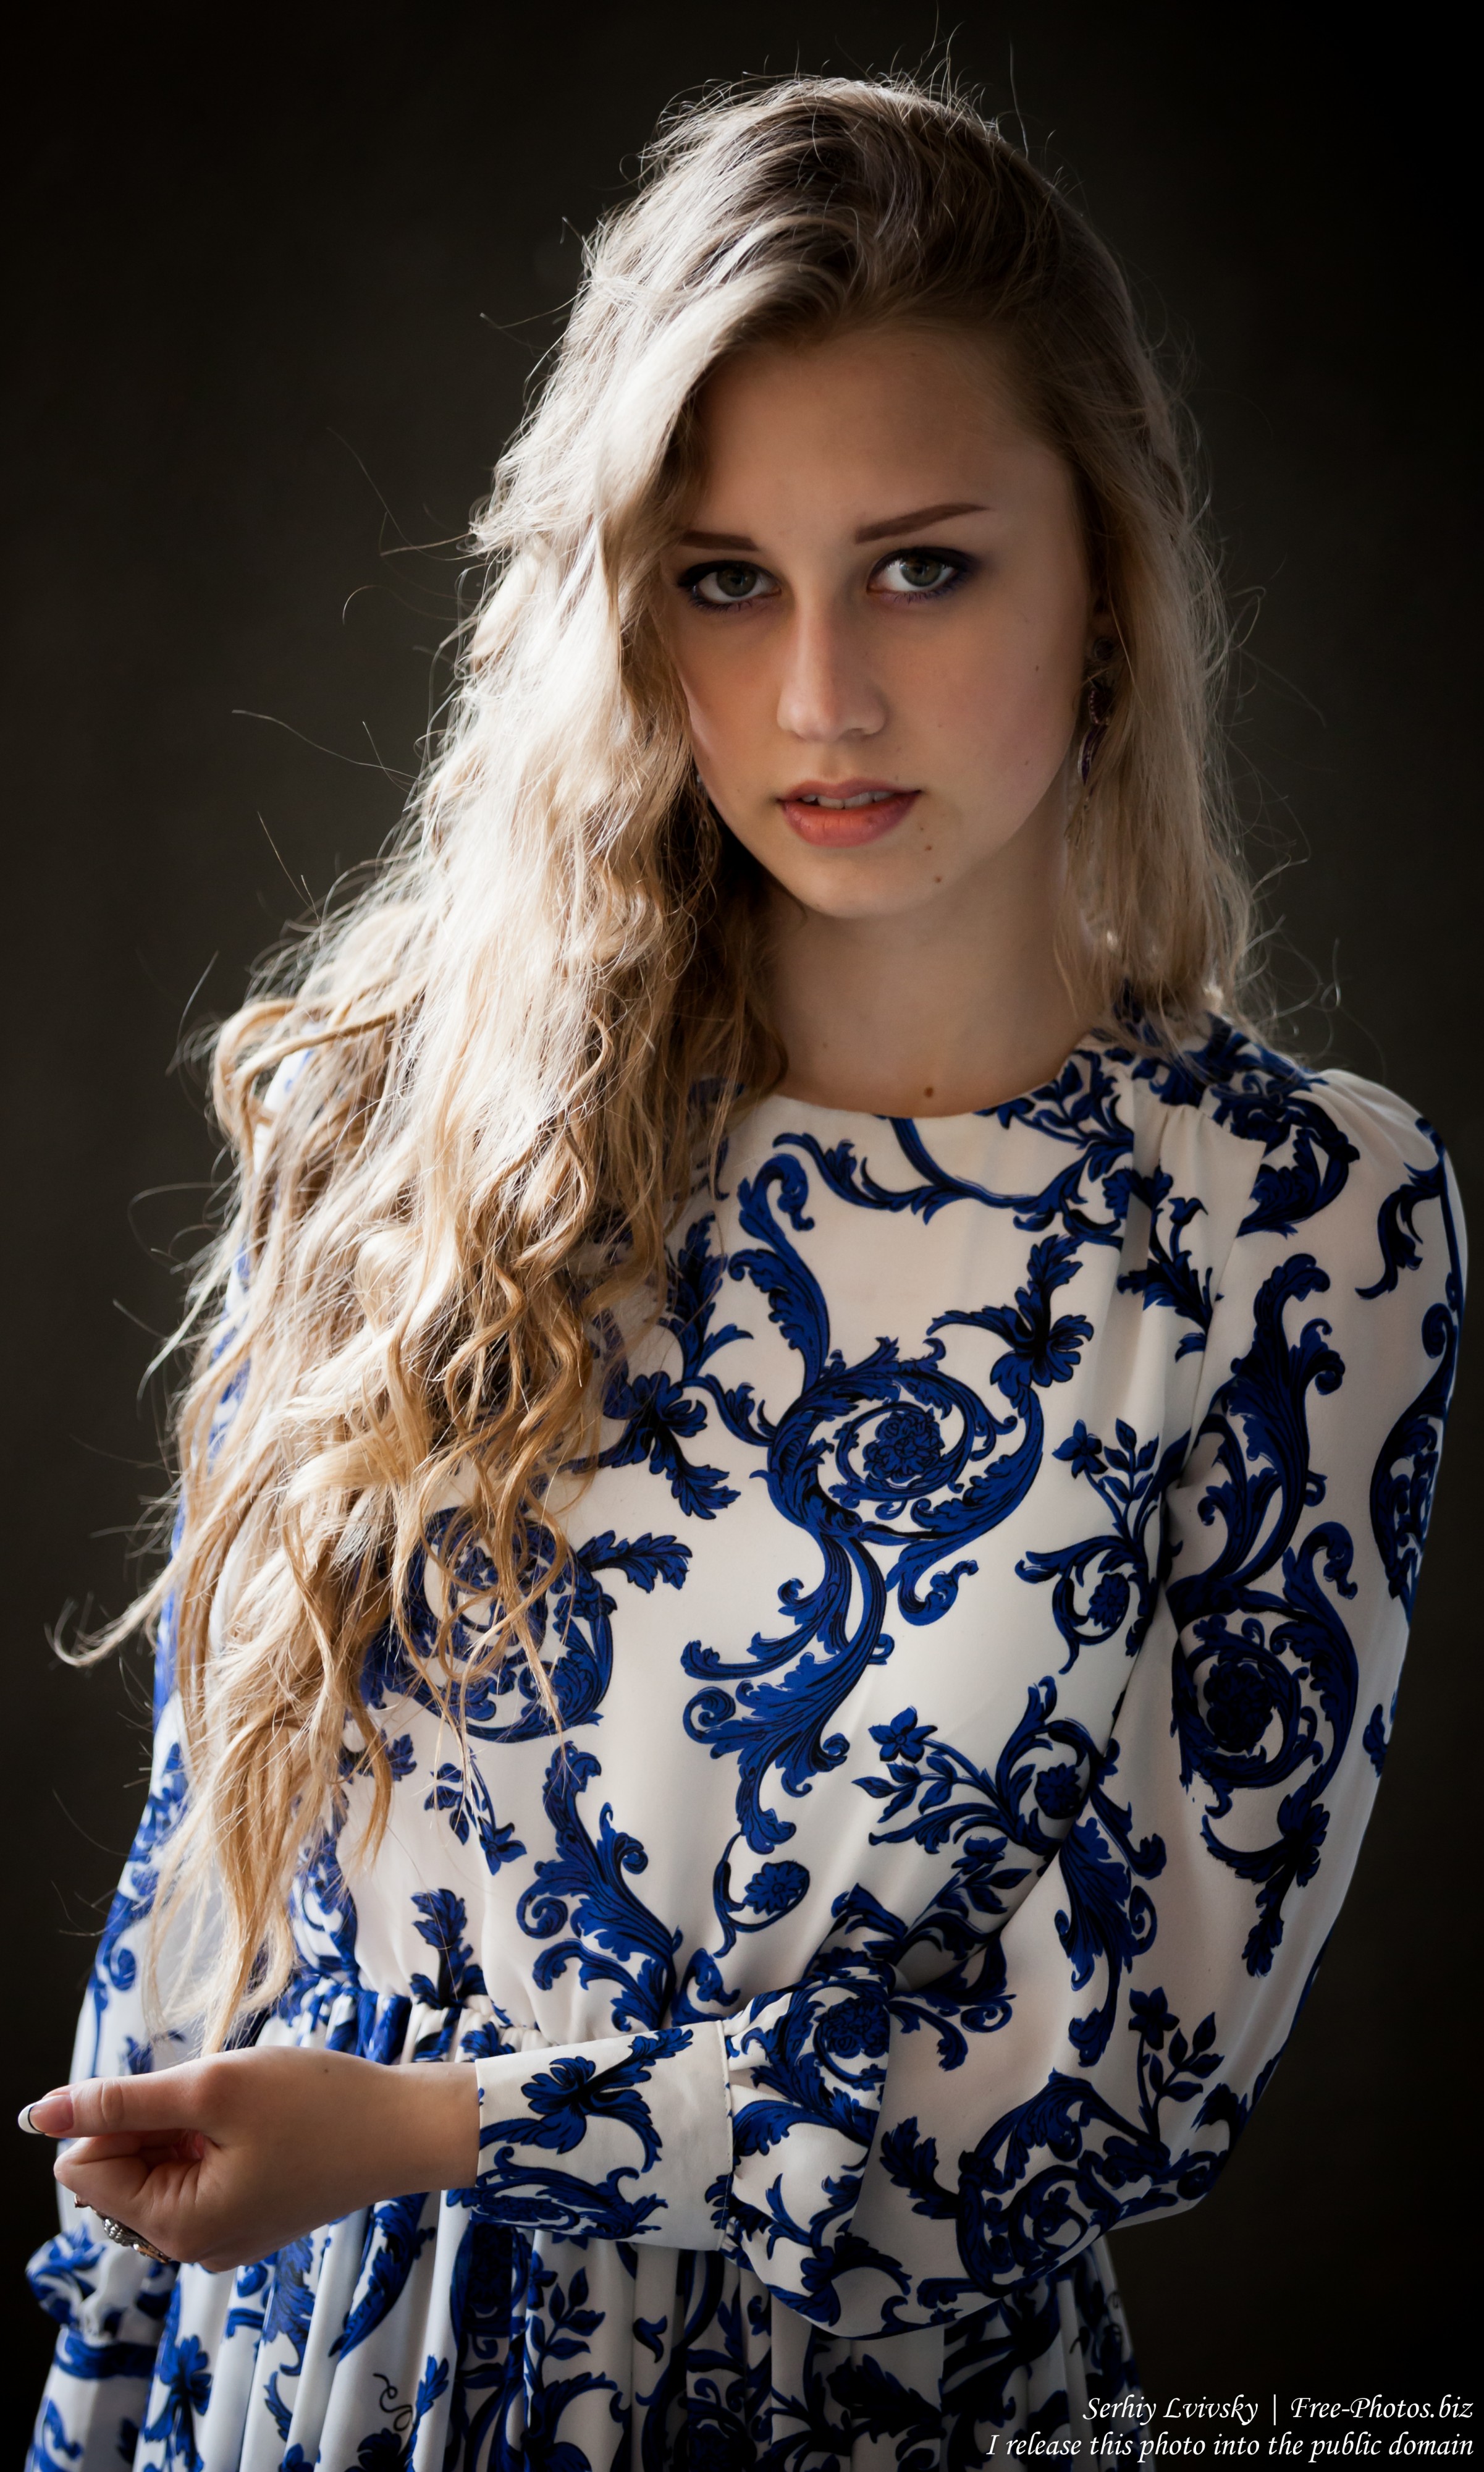 a 16-year-old natural blond girl photographed by Serhiy Lvivsky in July 2016, picture 4